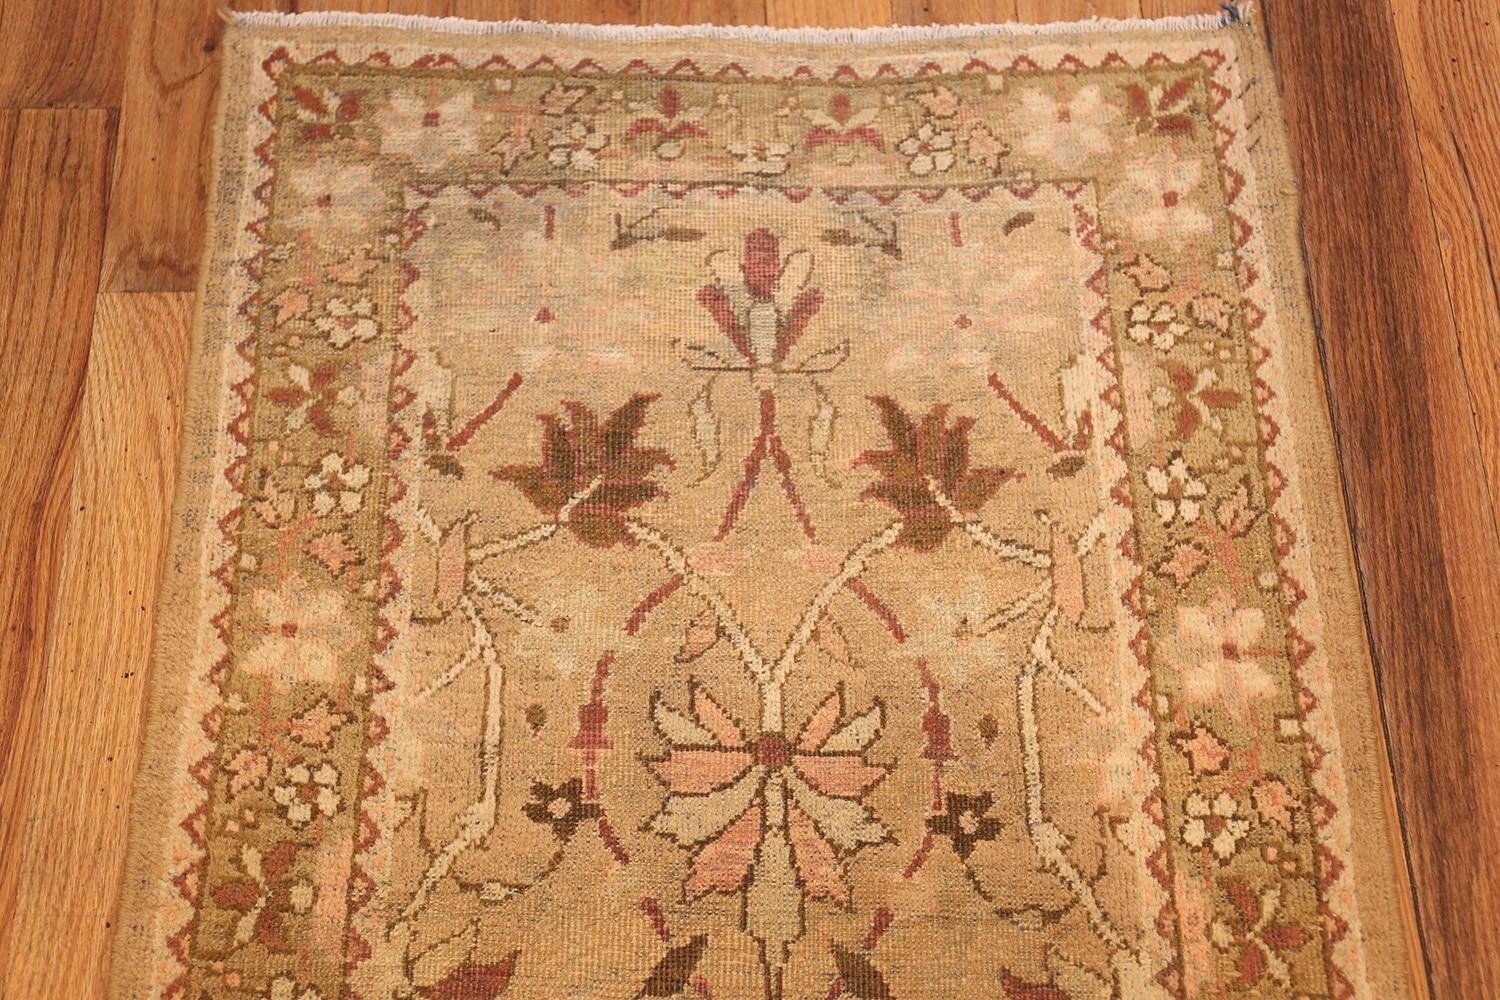 Antique Indian Amritsar runner rug, country of origin: India, date circa 1900. Size: 2 ft 4 in x 22 ft 5 in (0.71 m x 6.83 m).

